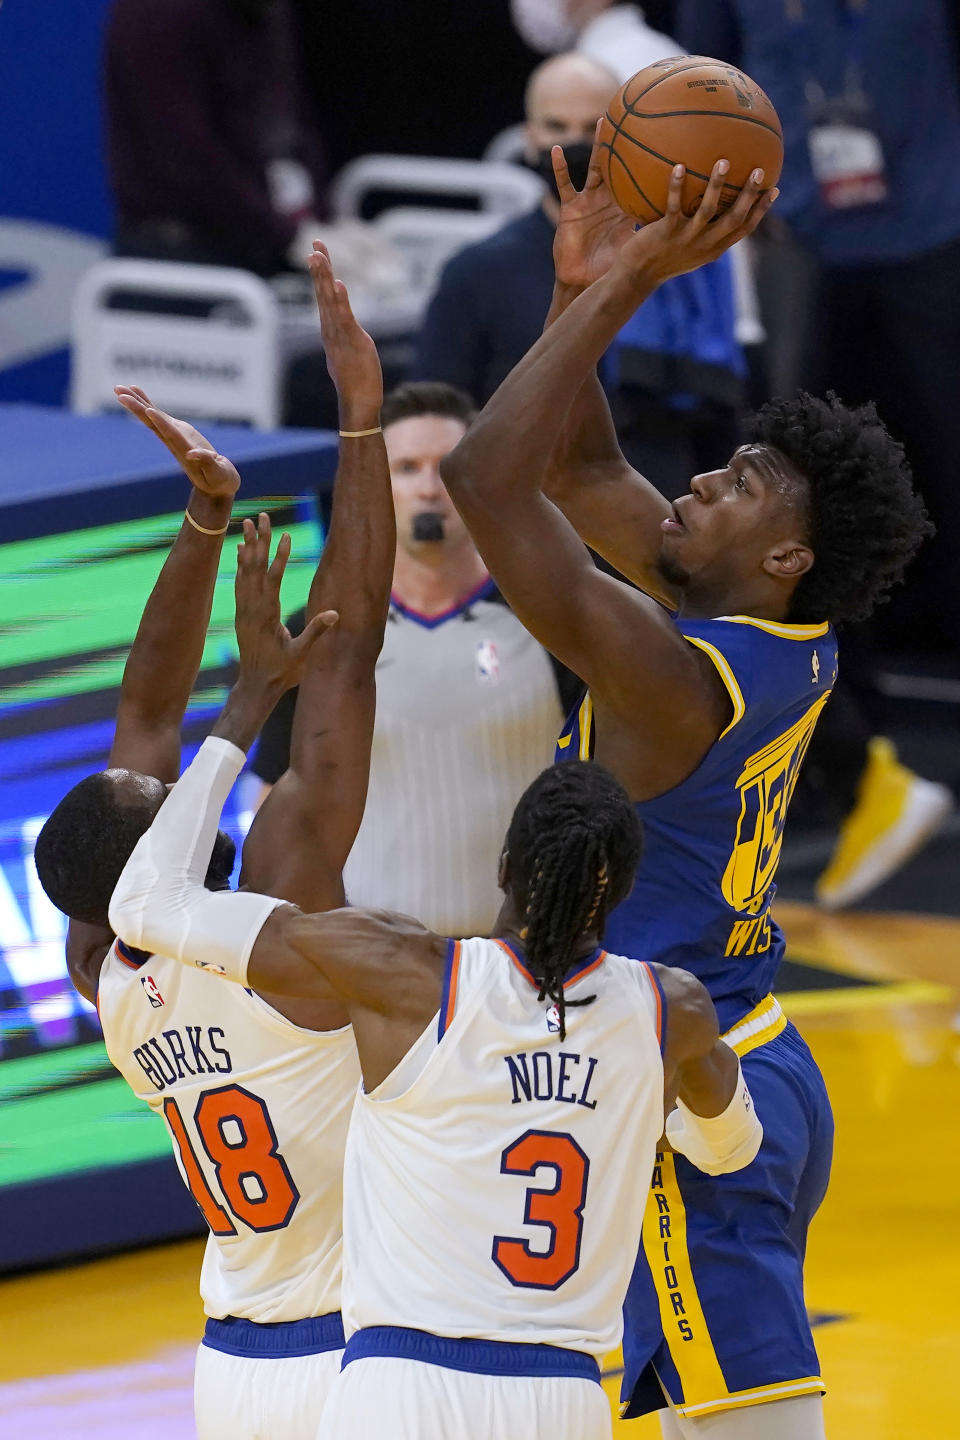 Golden State Warriors center James Wiseman, right, shoots over New York Knicks guard Alec Burks (18) and center Nerlens Noel (3) during the first half of an NBA basketball game in San Francisco, Thursday, Jan. 21, 2021. (AP Photo/Jeff Chiu)